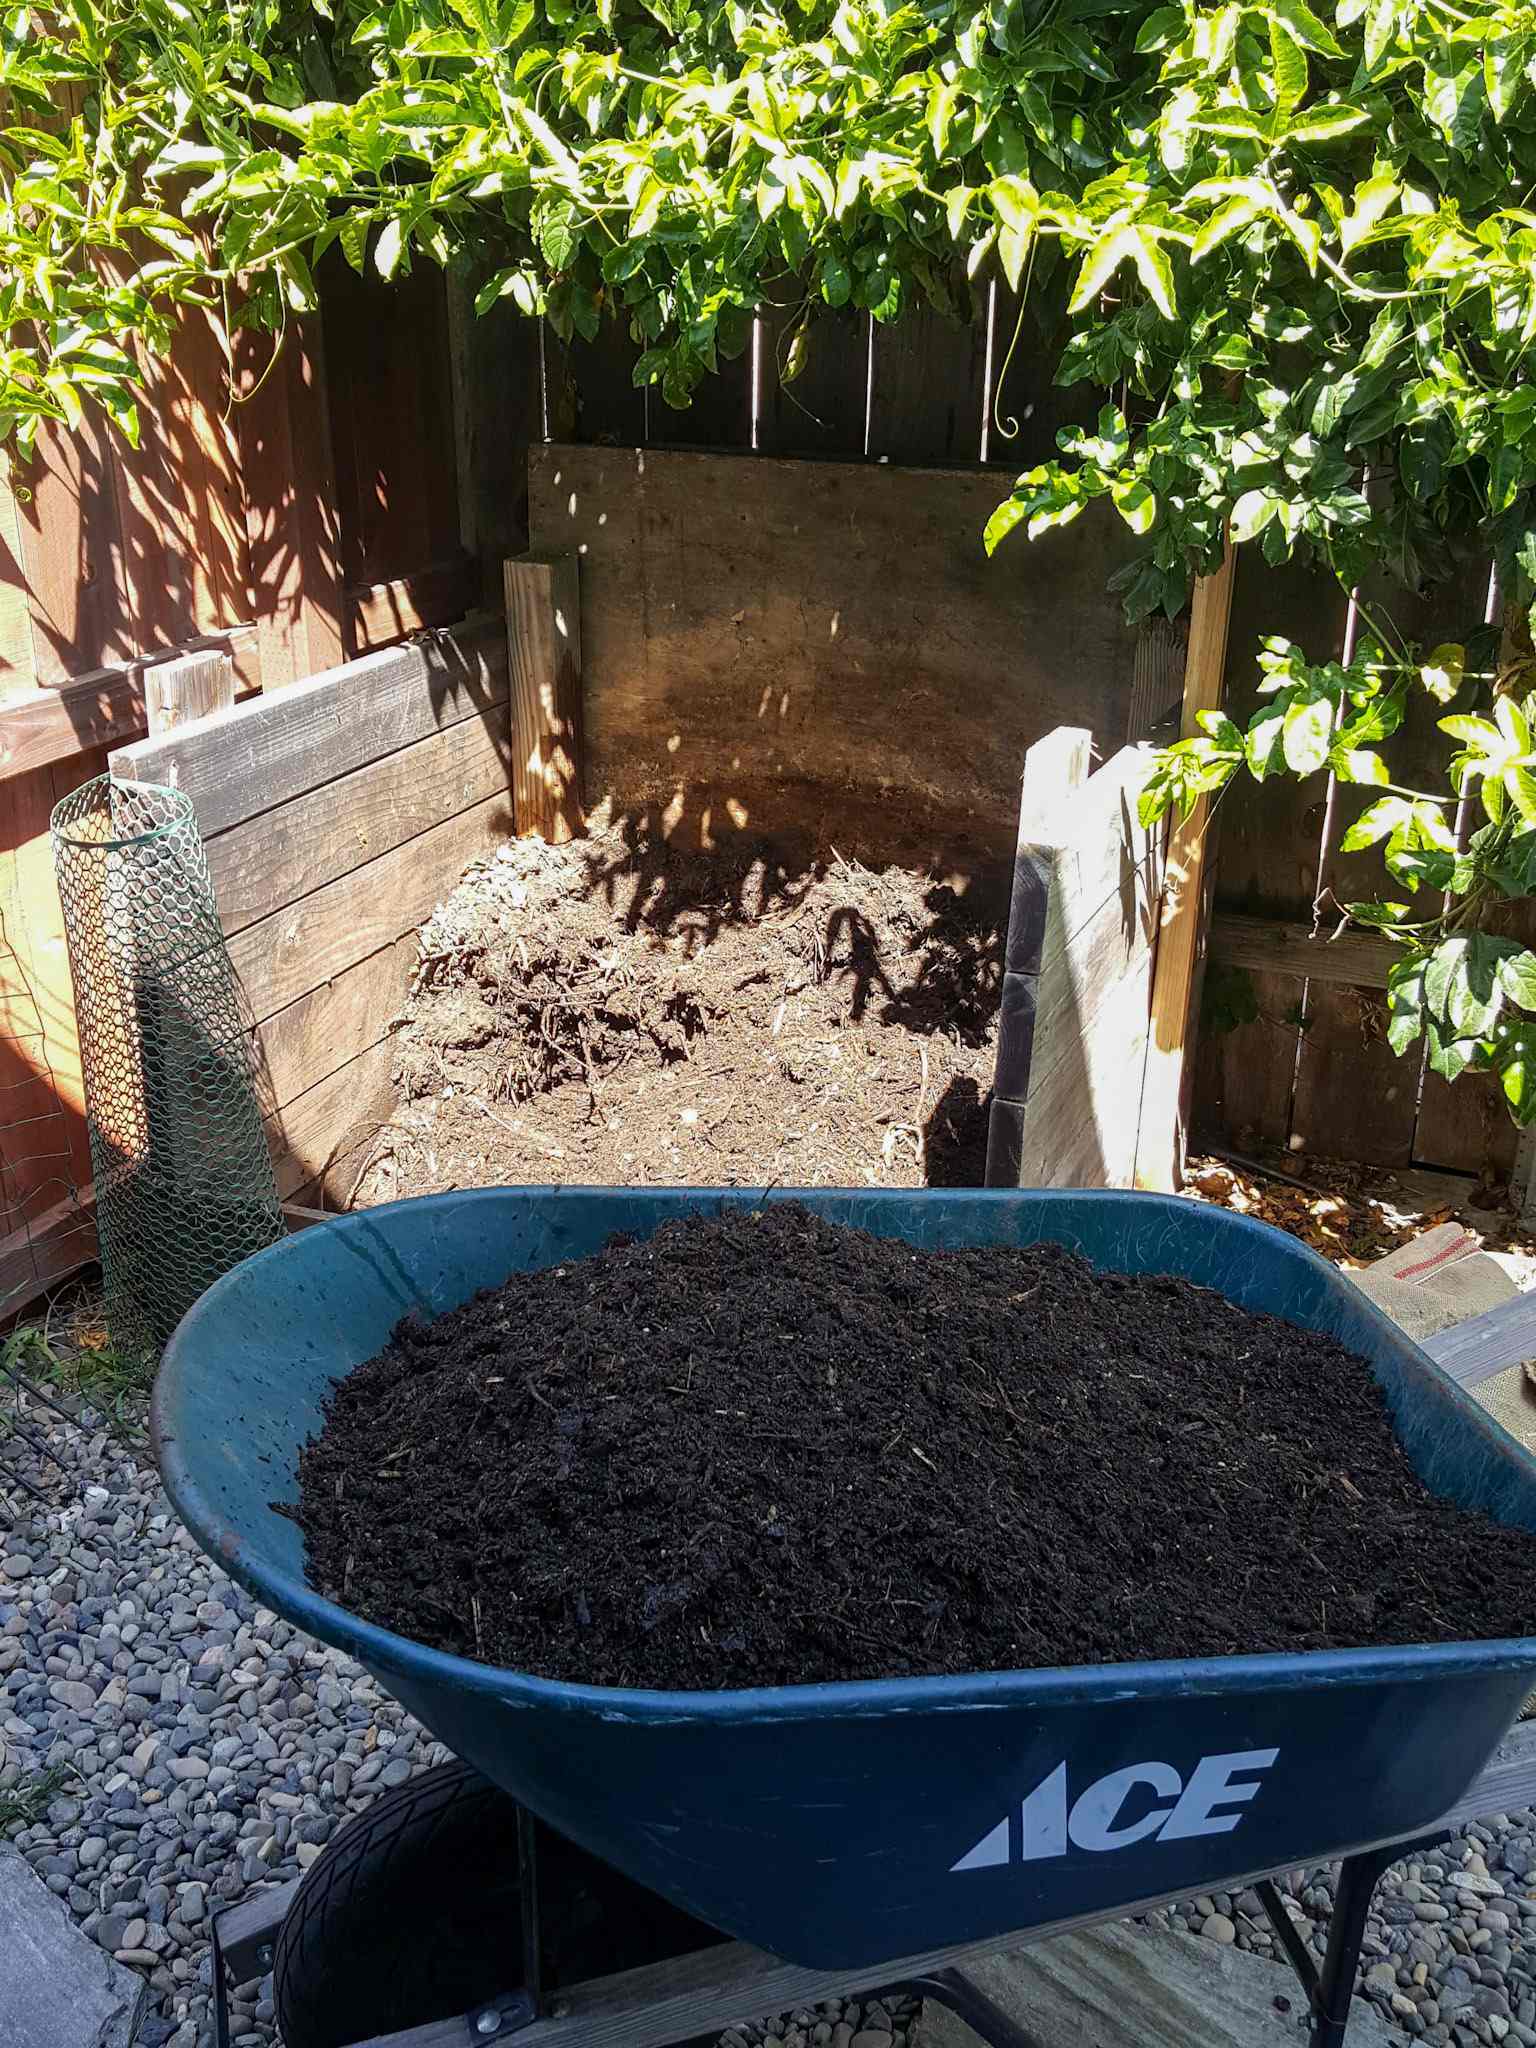 A wheel barrow sits in the foreground full to the brim with freshly made compost that is dark black in color. In the background there is a three sided wooden stall that is nearly empty now that the finished compost has been harvested from the bin. Using the hot pile method is efficient and effective when you want to make compost quickly. 